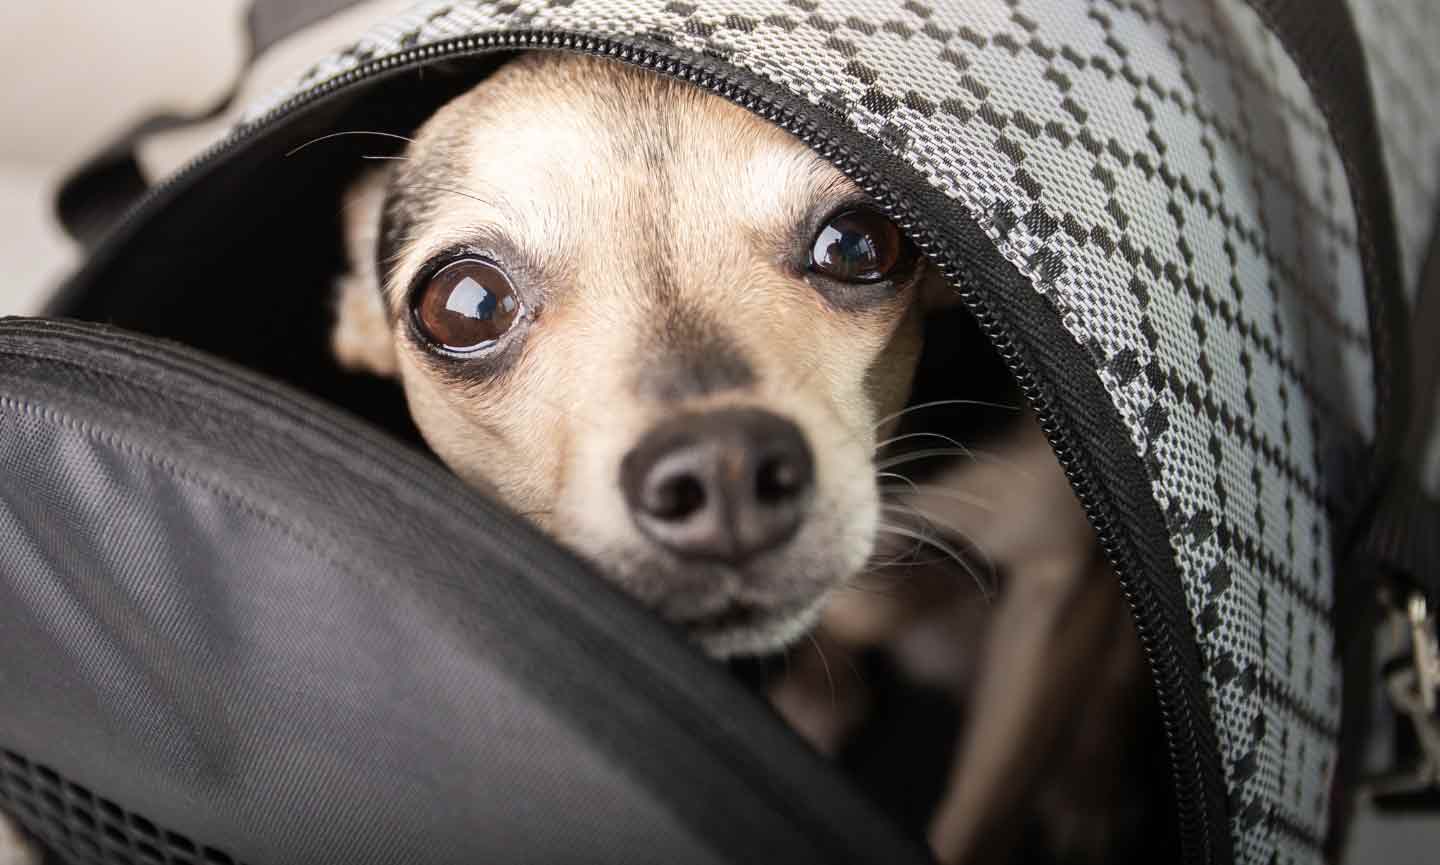 A small dog in a travel carrier